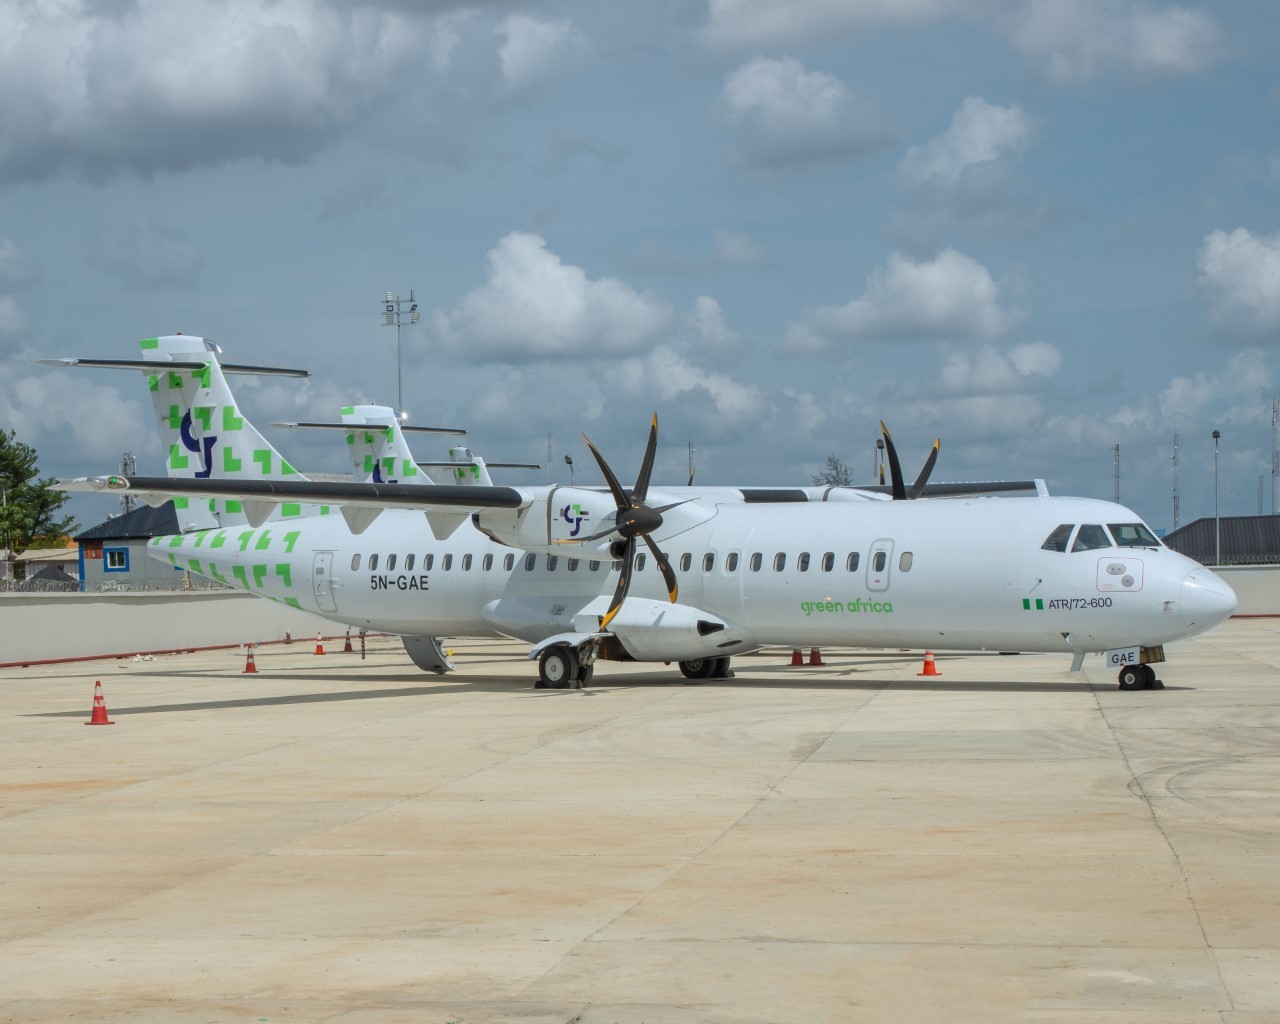 Green Africa Airways: Nigeria's Newest Low-Cost Carrier